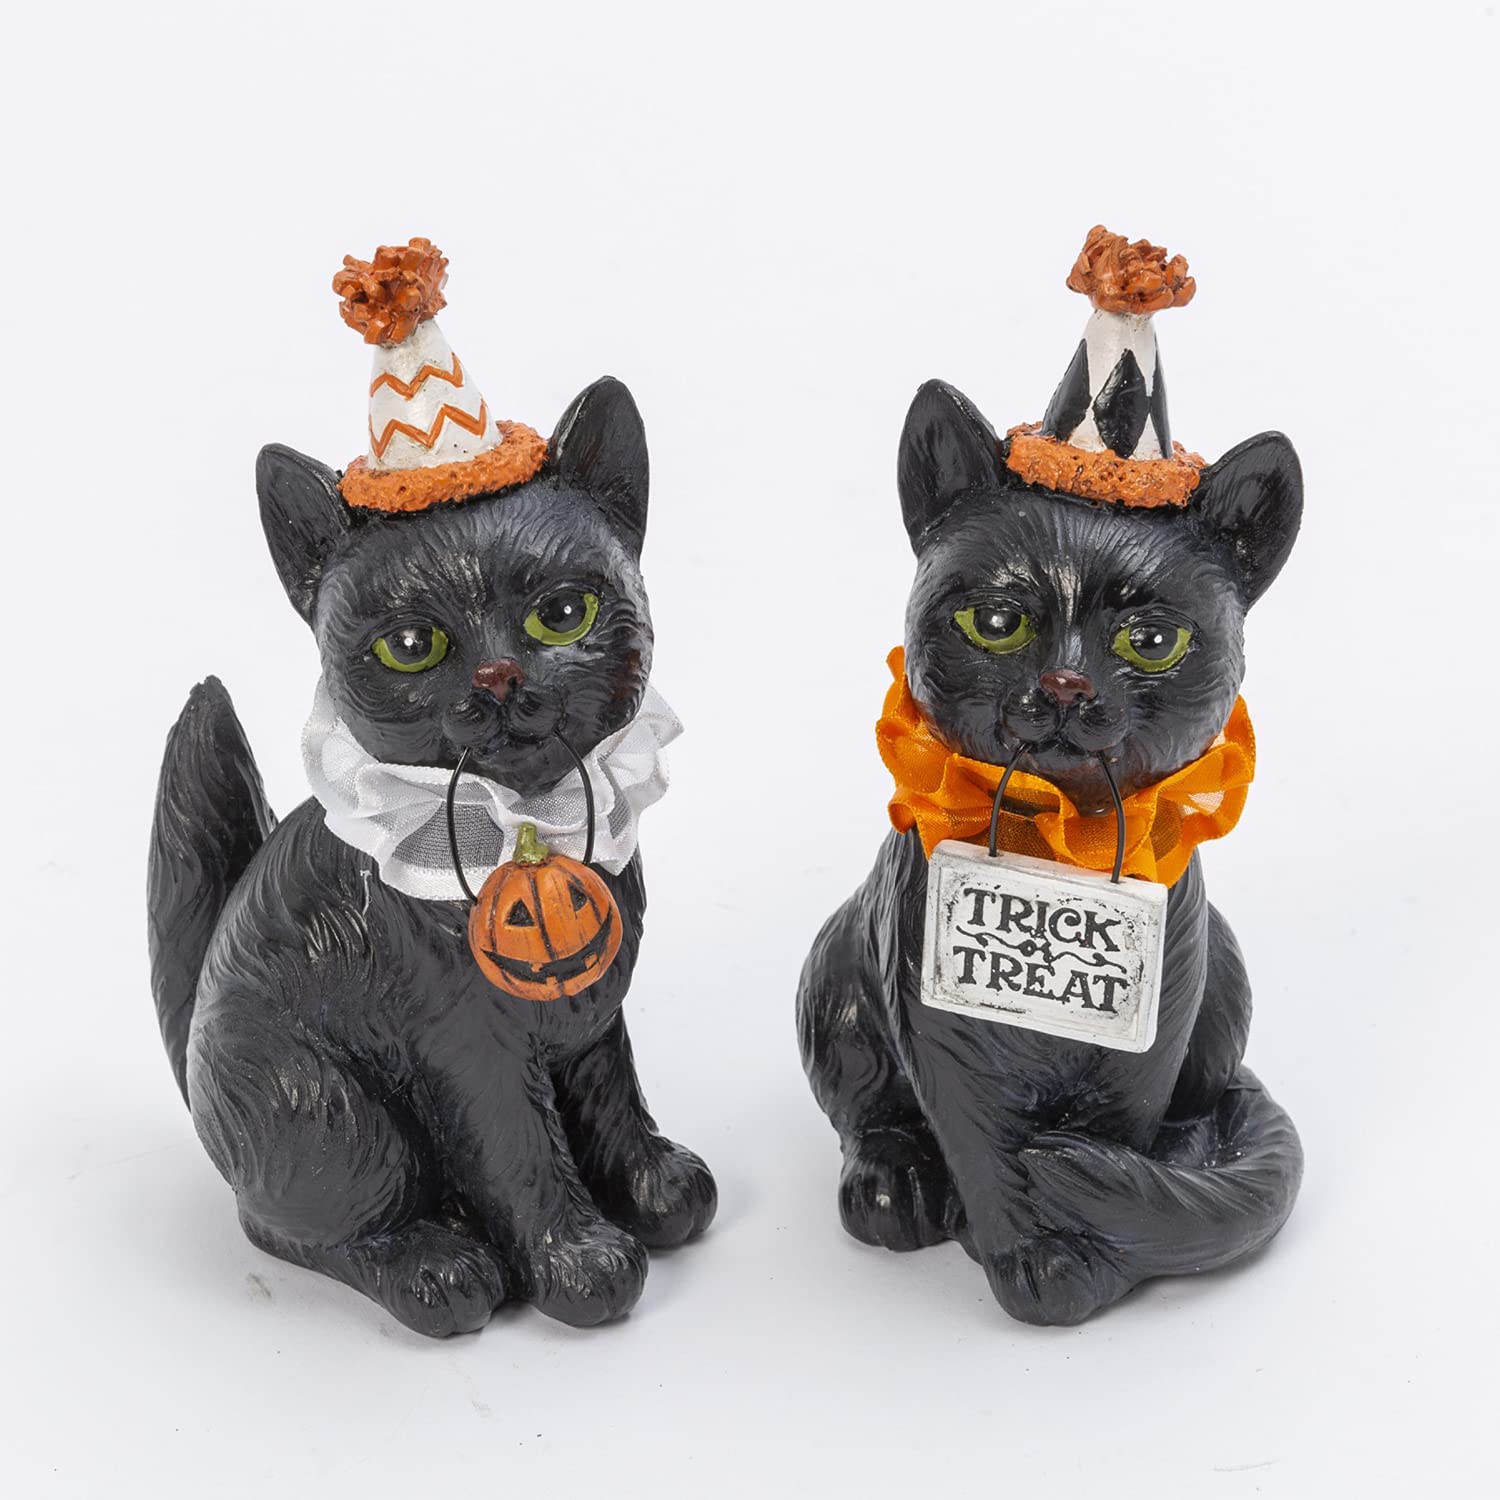 Set of 2 6-Inch Collectible Vintage Black Cat Figurines in Cute Pumpki -  One Holiday Way